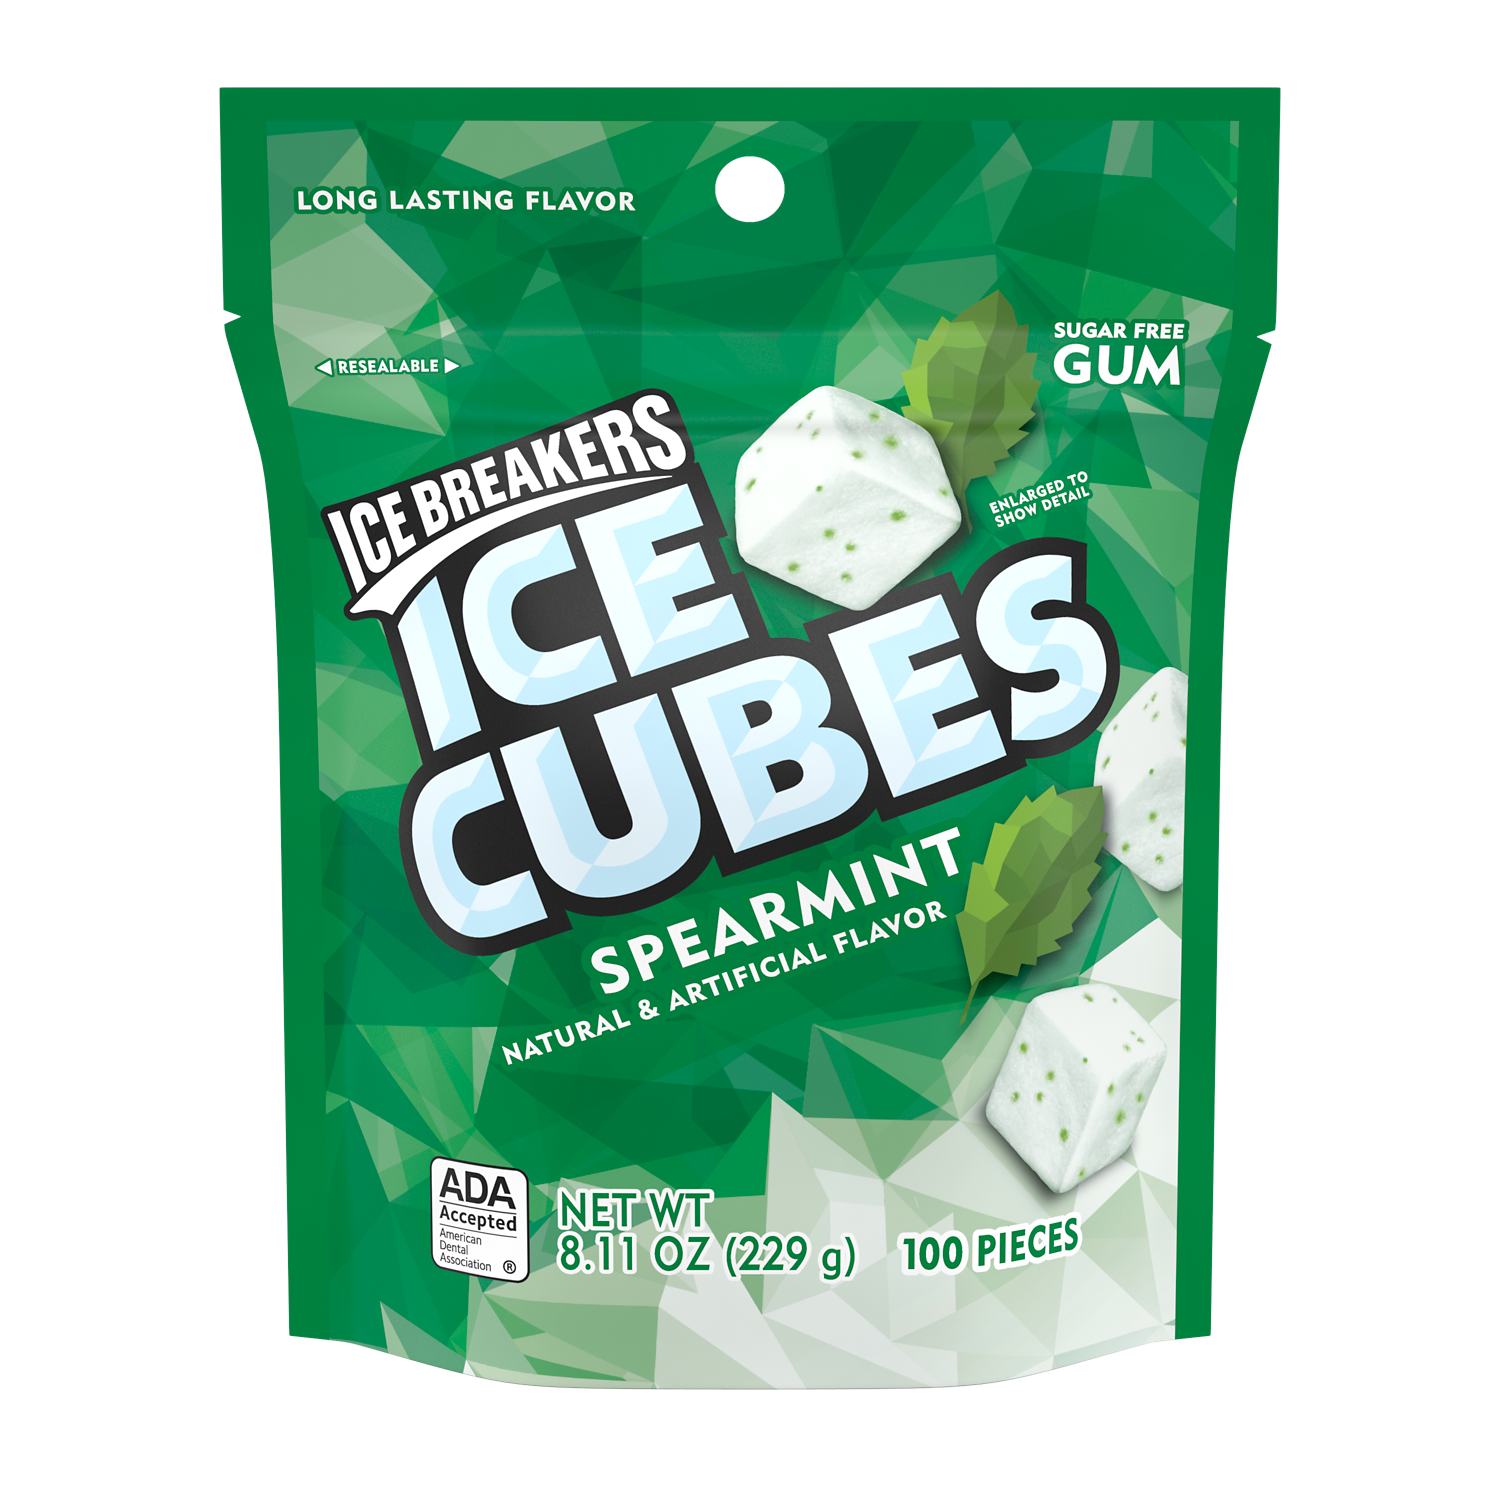 ICE BREAKERS ICE CUBES Spearmint Sugar Free Gum, 8.11 oz bag, 100 pieces - Front of Package